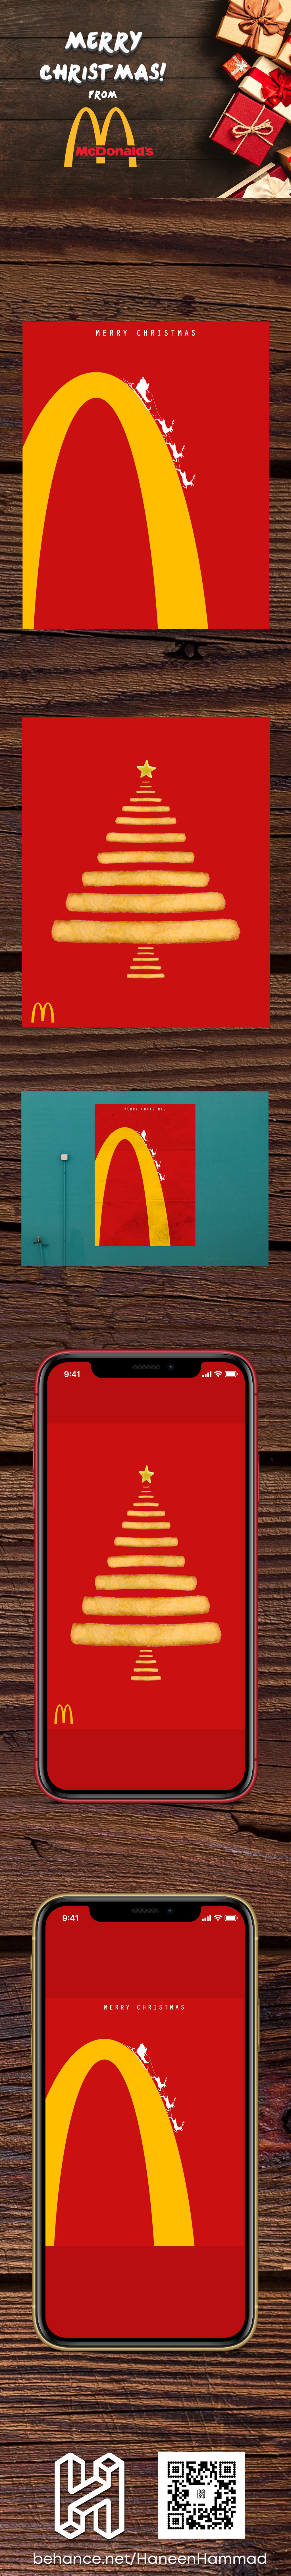 merry Christmas mcdonald's red yellow ad iphone poster creative wow